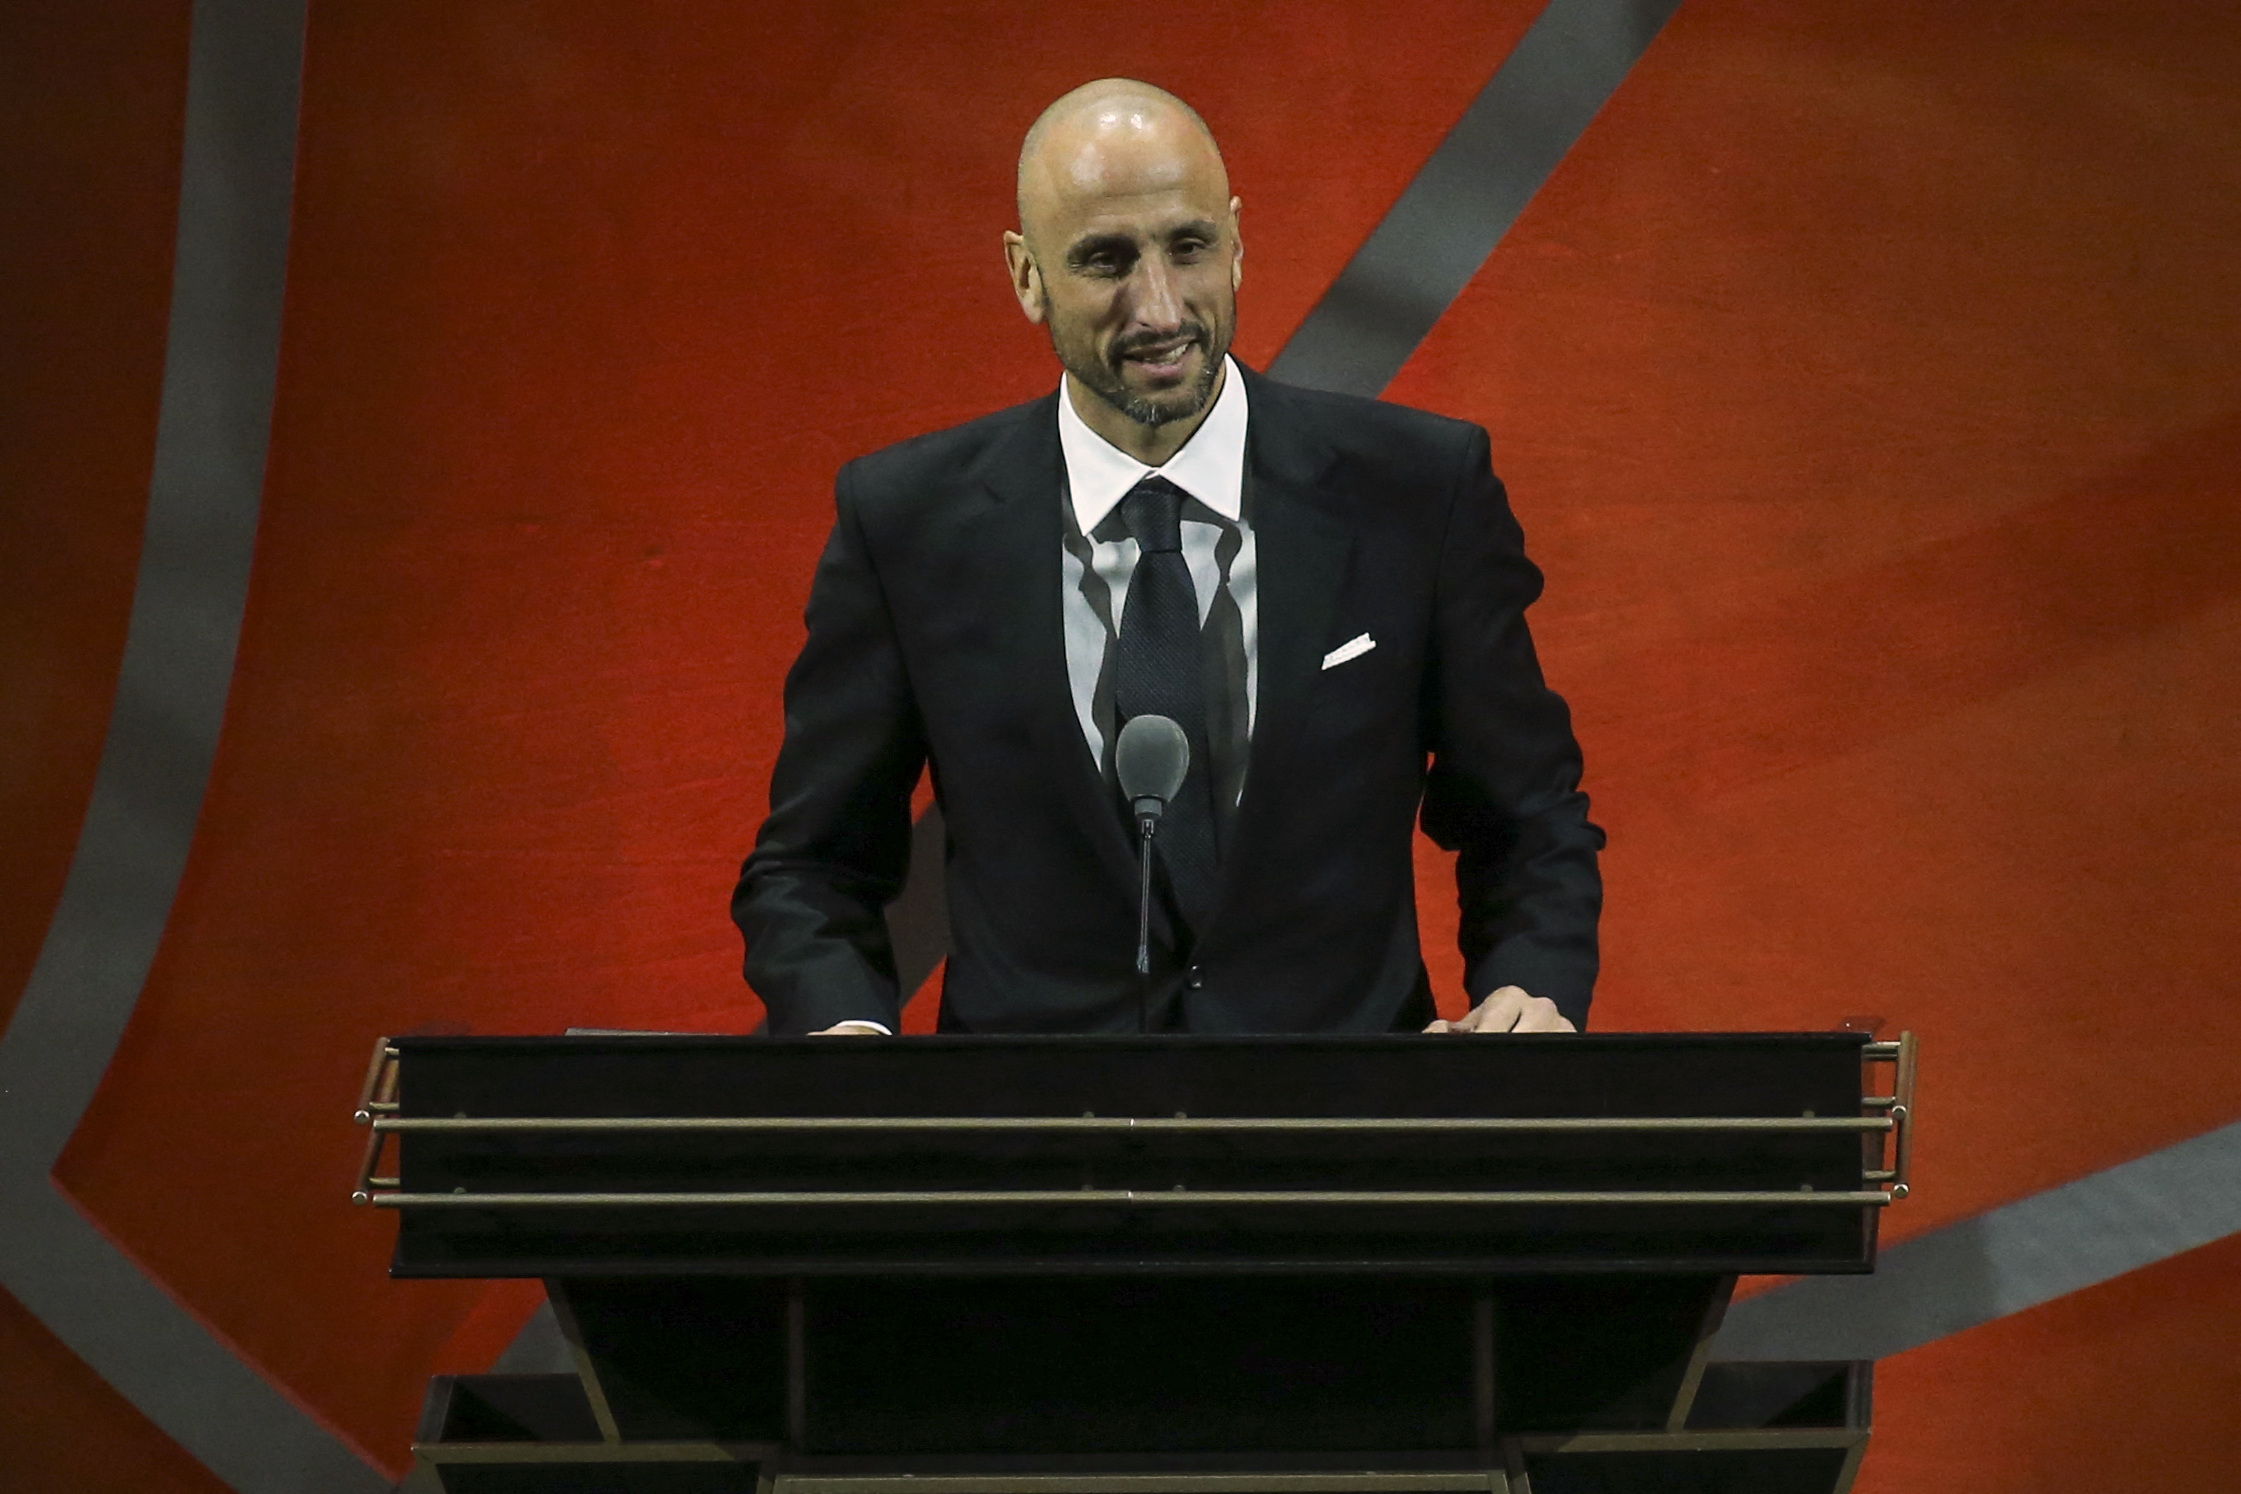 FILE PHOTO: Sep 10, 2022; Springfield, MA, USA; Manu Ginobili is inducted into the 2022 Basketball Hall of Fame at Symphony Hall.